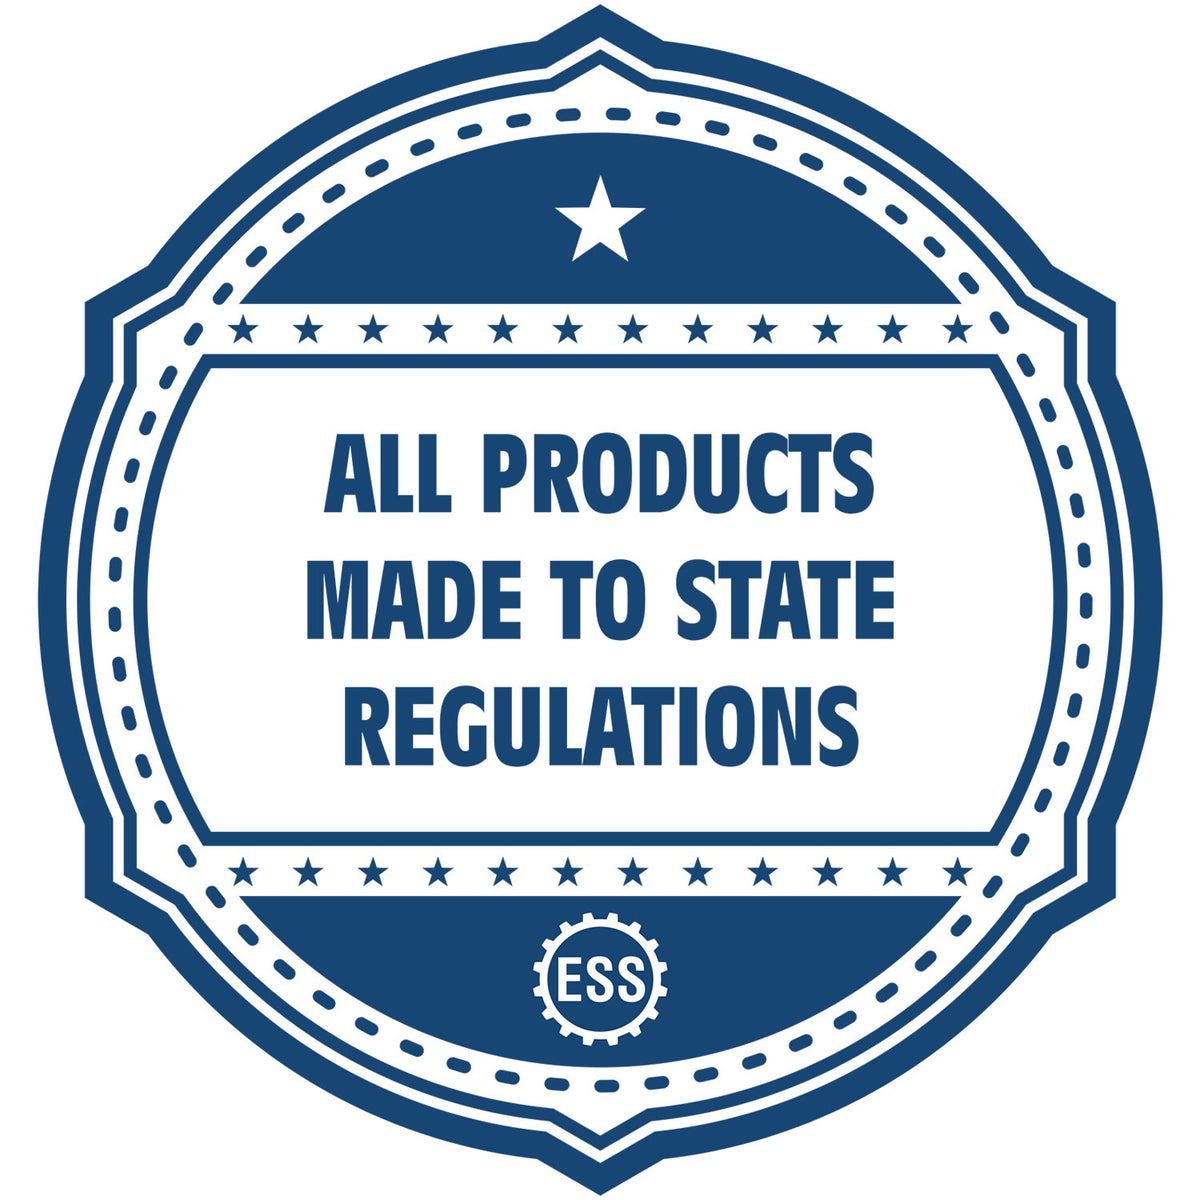 An icon or badge element for the Connecticut Professional Engineer Seal Stamp showing that this product is made in compliance with state regulations.